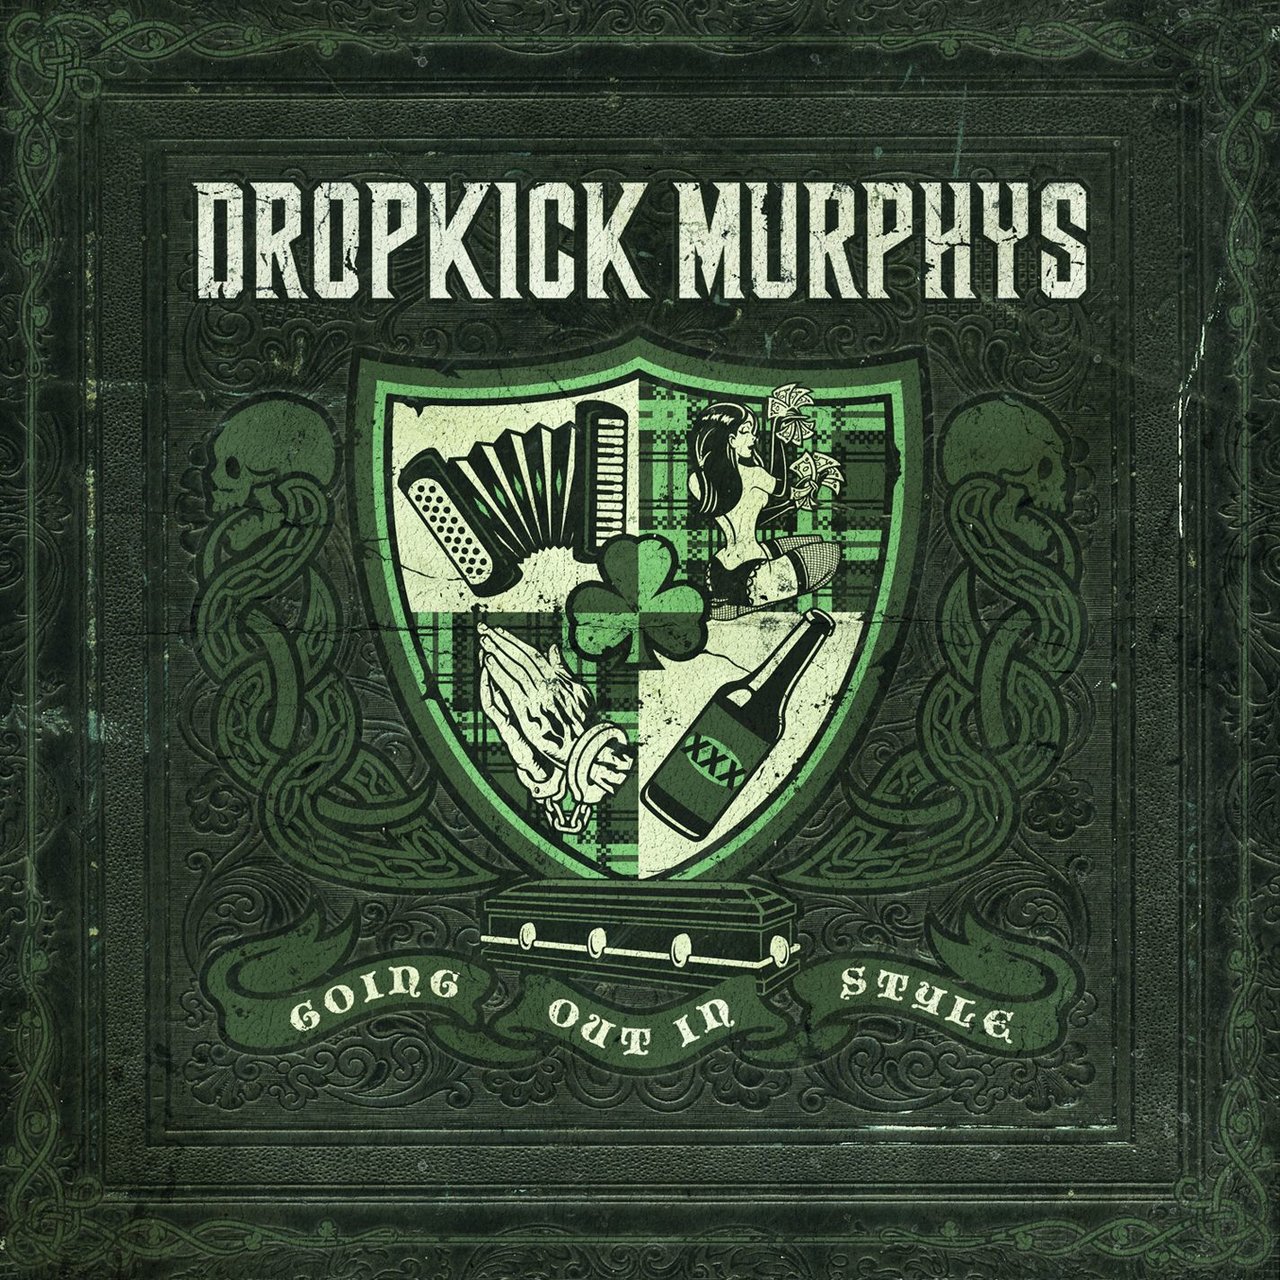 Dropkick Murphys - Going Out In Style - Live at Fenway Edition [2011]